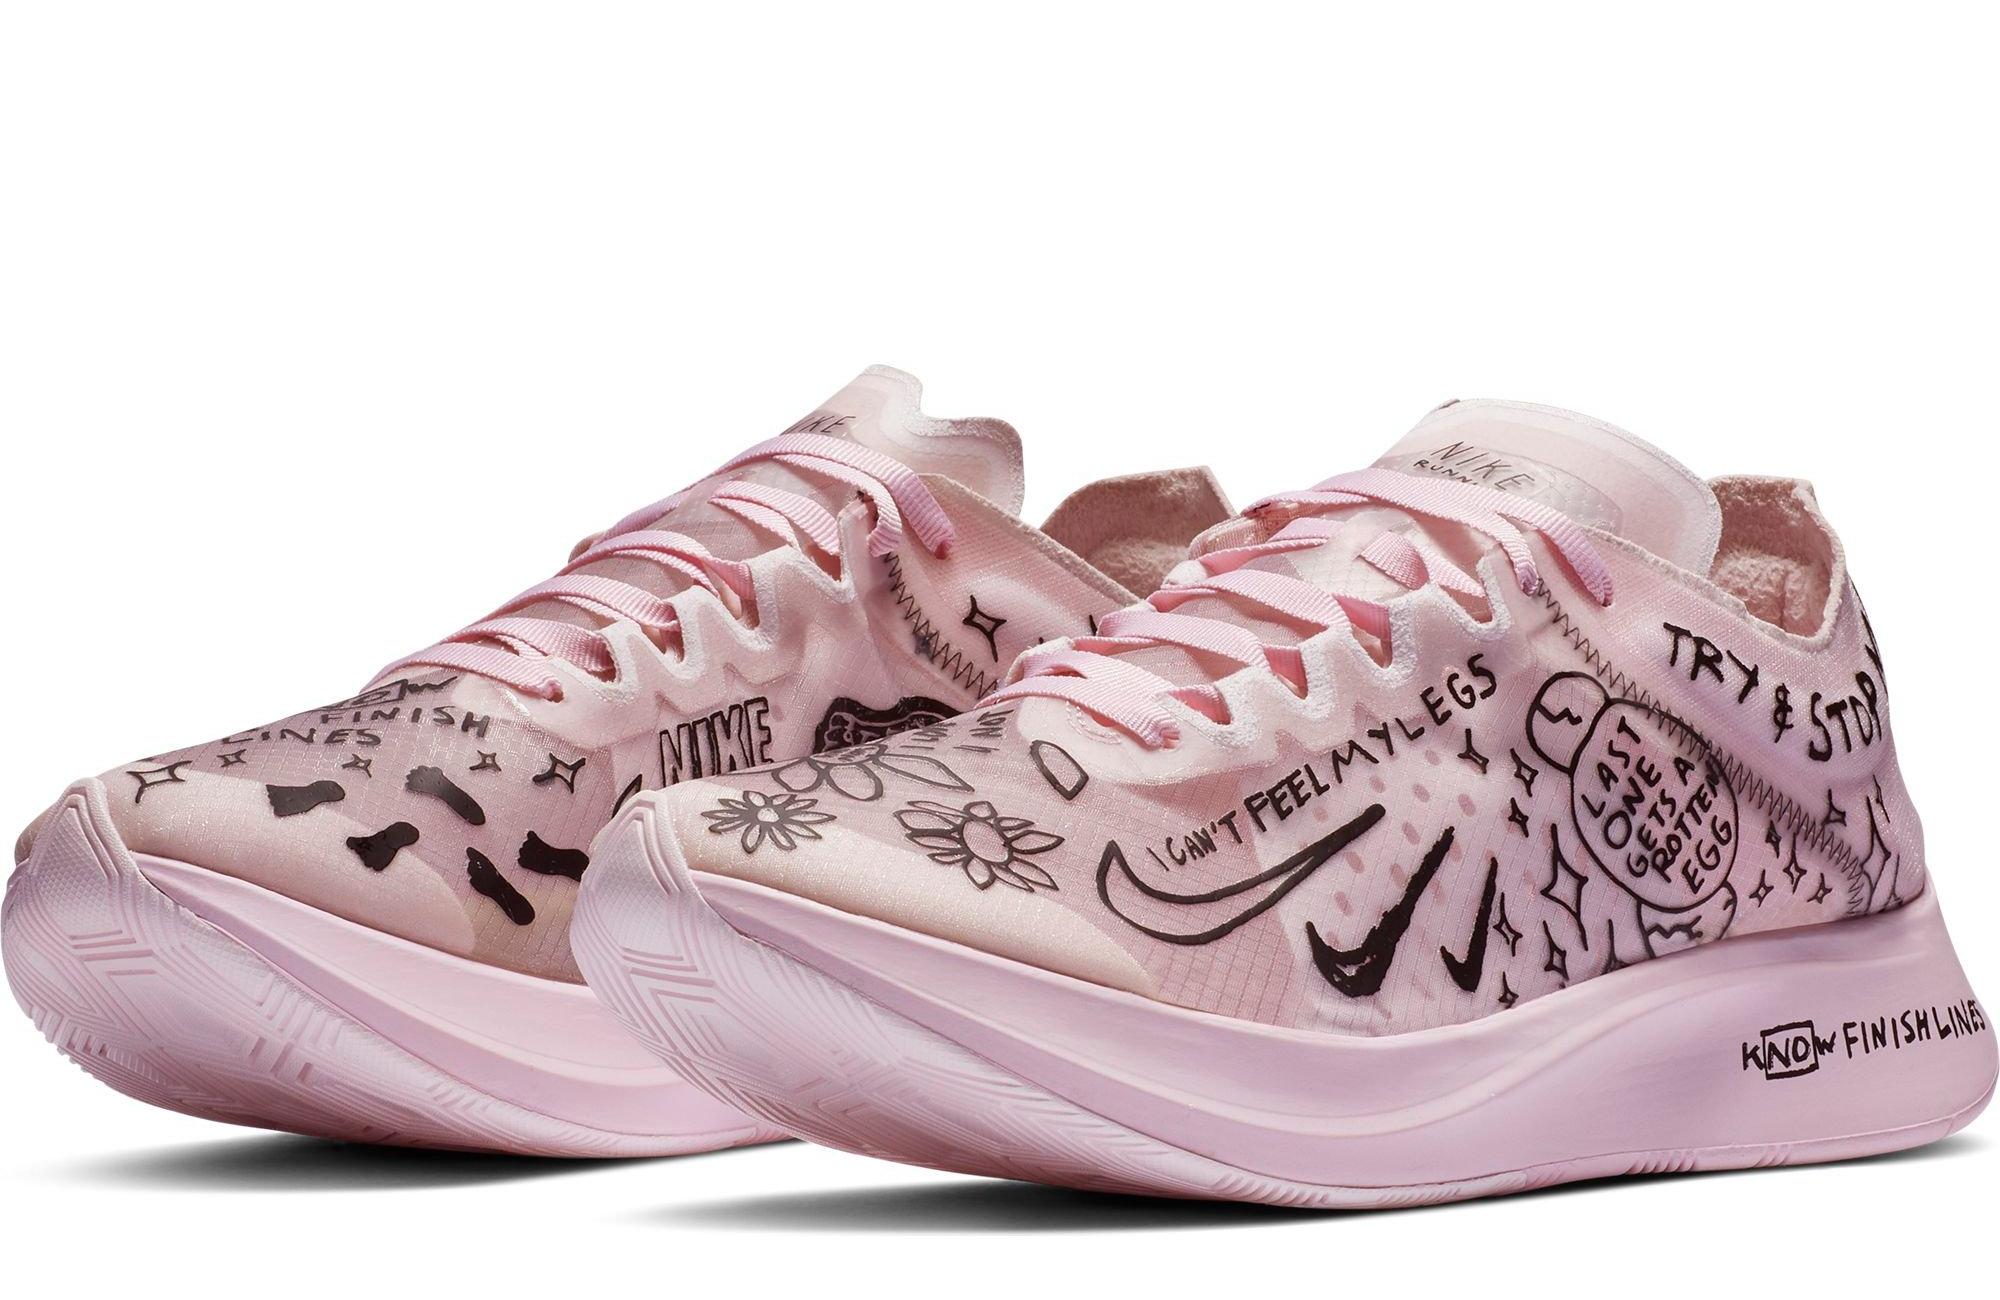 routine Centrum Embryo Sneakers Release- Nike Zoom Fly Fast “Artist Pack” Running Shoes